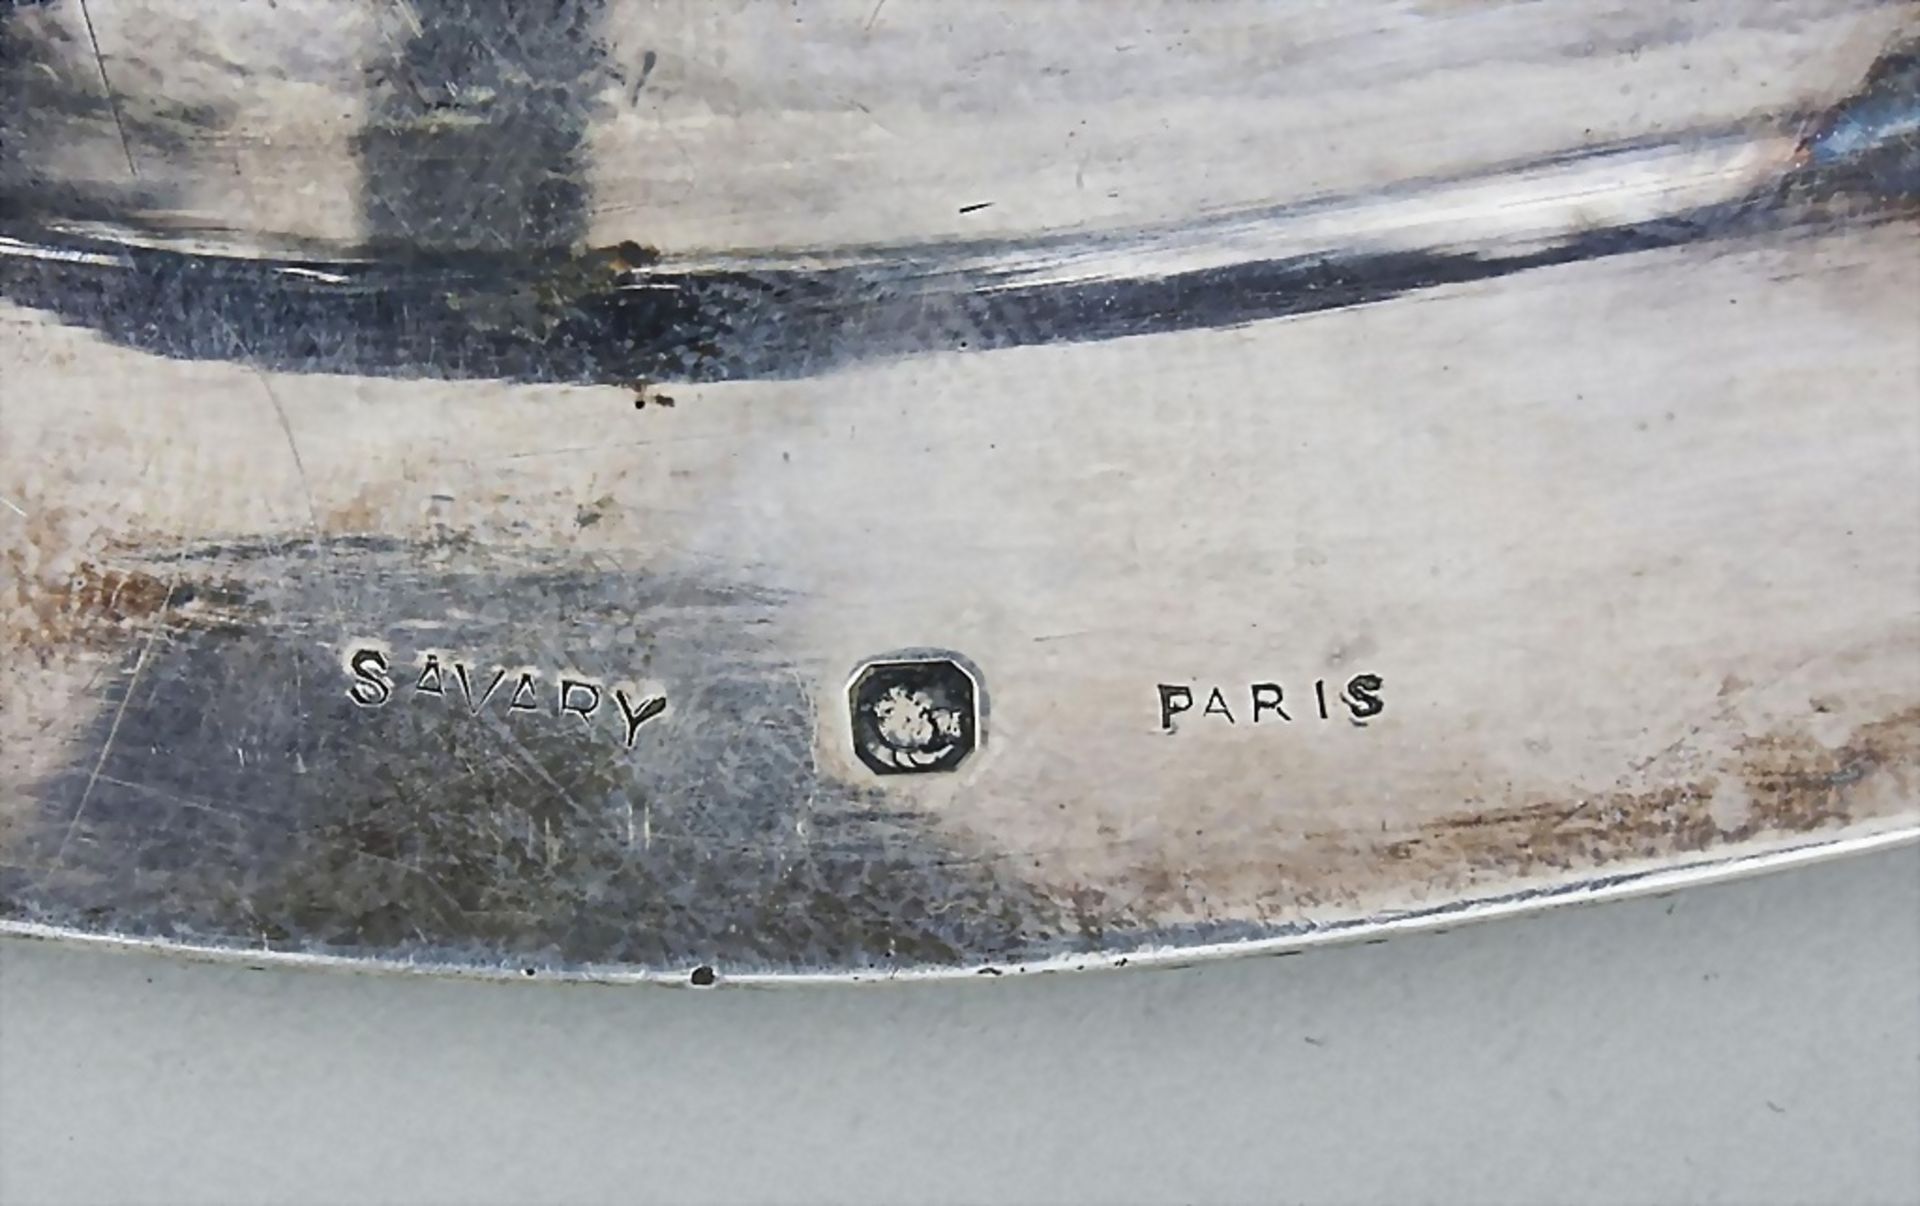 Ovales Tablett / An oval silver tray, Savary, Paris, Ende 19. Jh. - Image 2 of 3